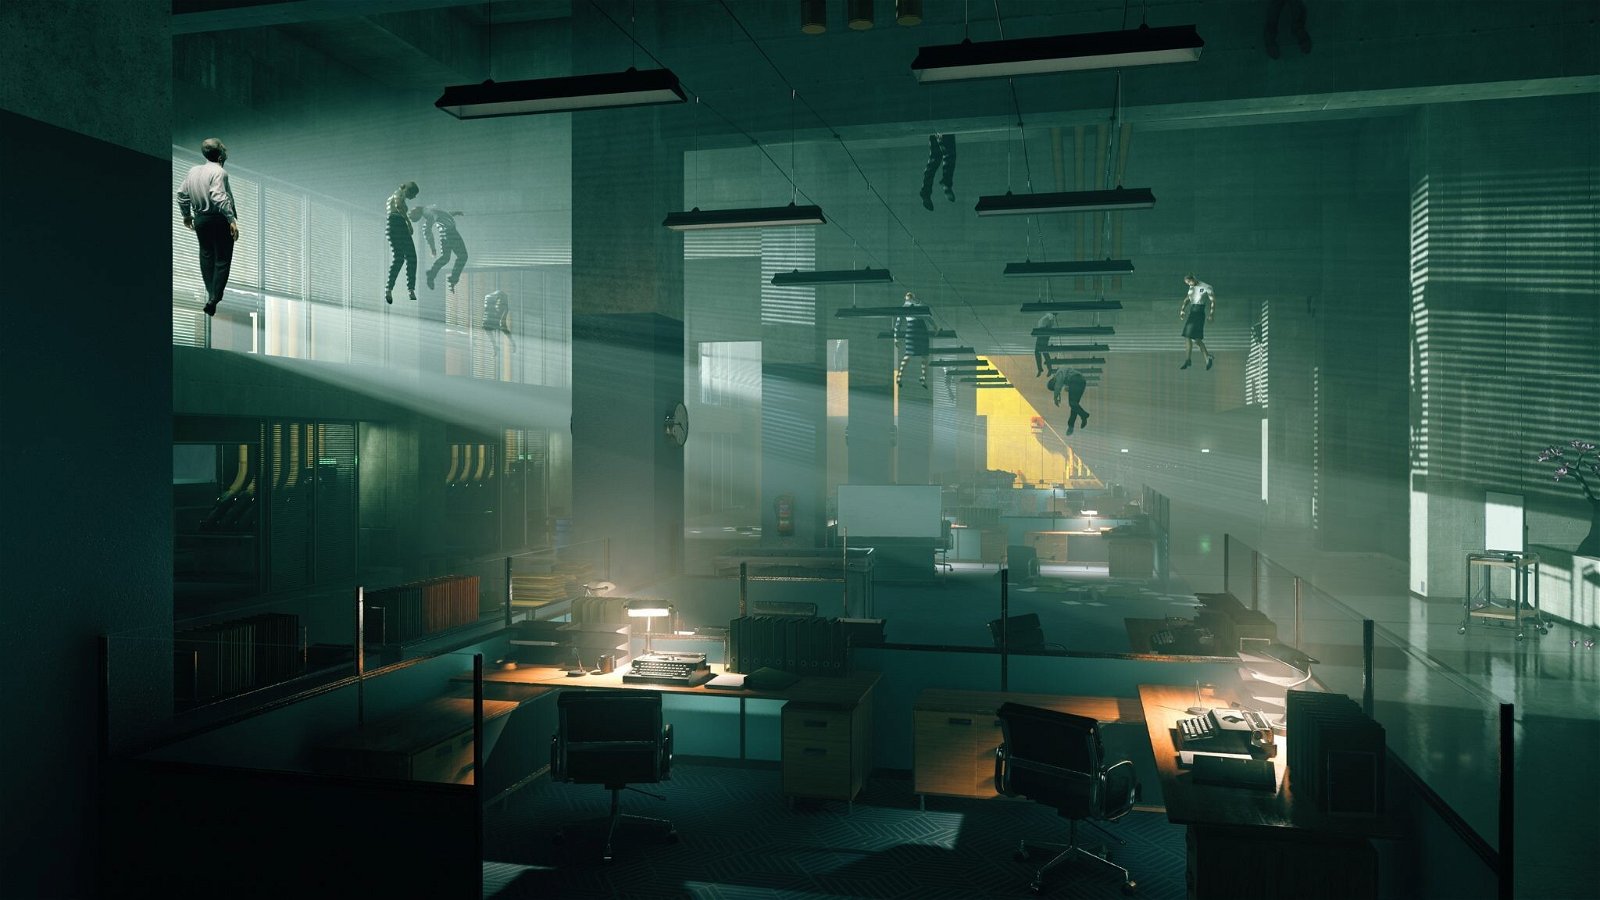 Control, Control Ultimate Edition, Control [Ultimate Edition], PlayStation 4, Xbox One, PS4, XONE, gameplay, features, release date, price, trailer, screenshots, 505 Games, Remedy Entertainment